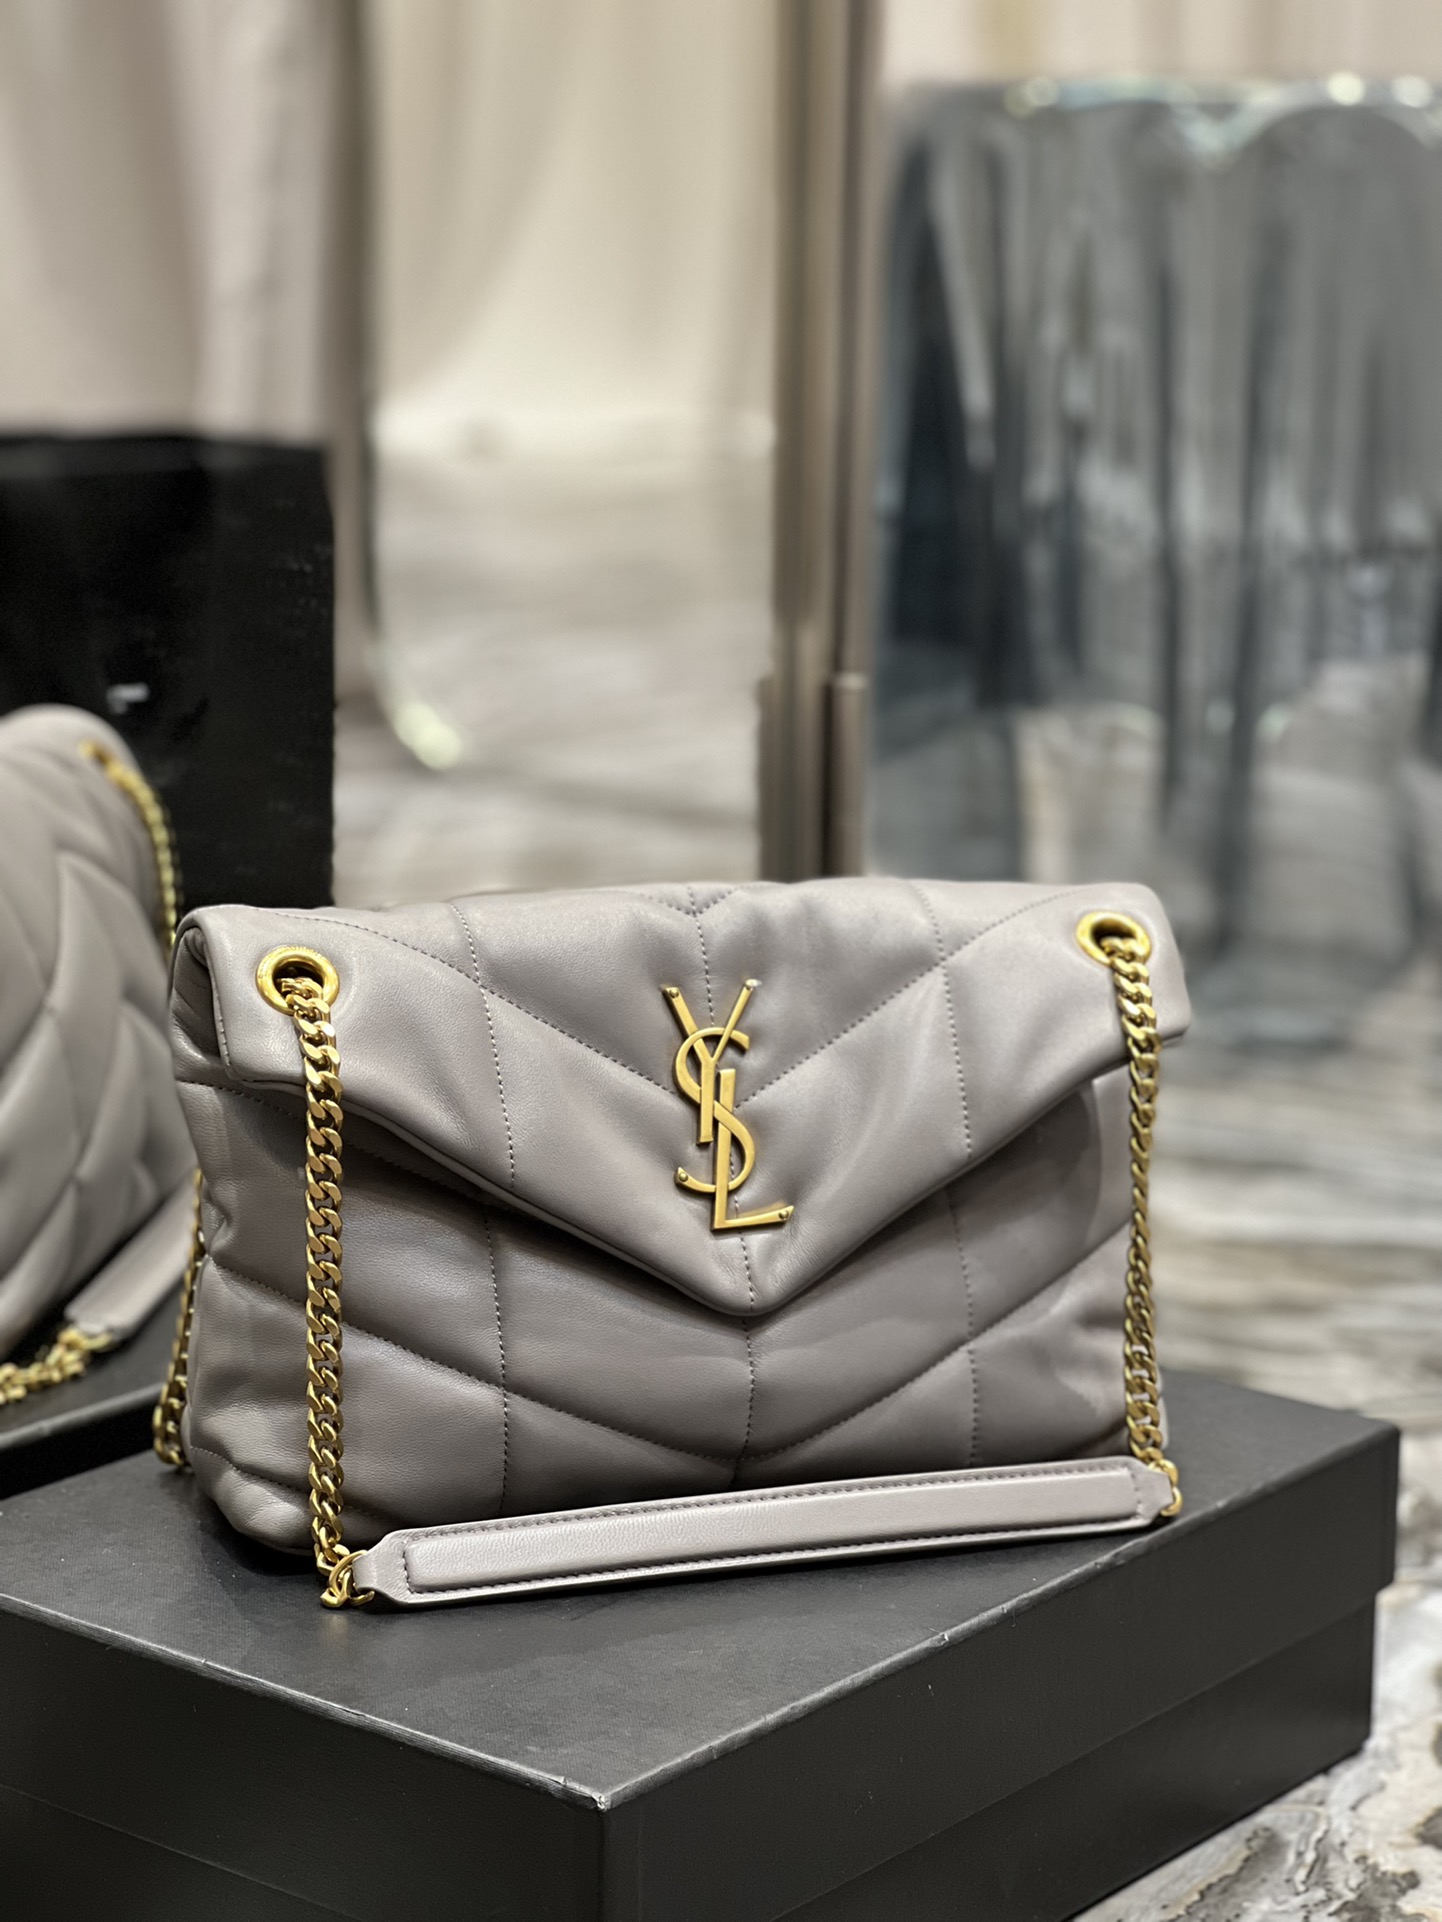 Saint Laurent Loulou Puffer Small Bag in quilted lambskin leather grey